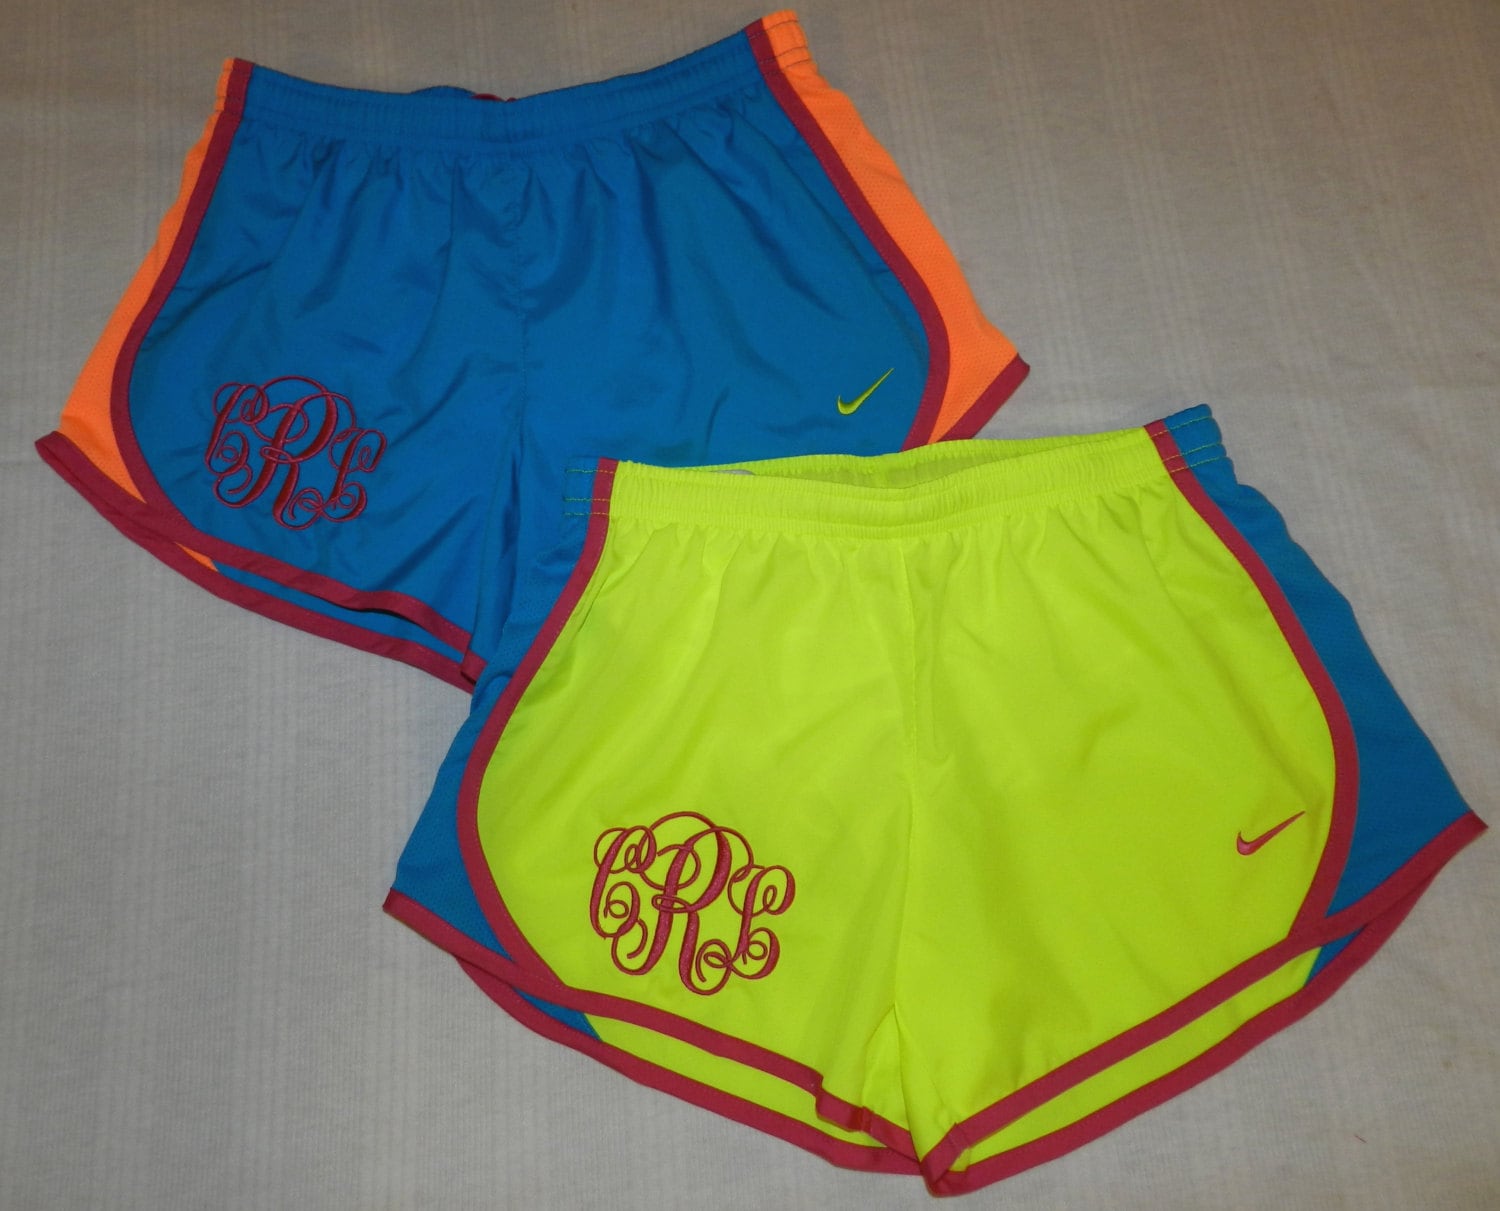 SouthernTouchMono Monogrammed Running Shorts - Monogrammed Athletic Shorts - Unique Gift Idea - Personalized Activewear - Monogrammed Cheer/Dance Shorts